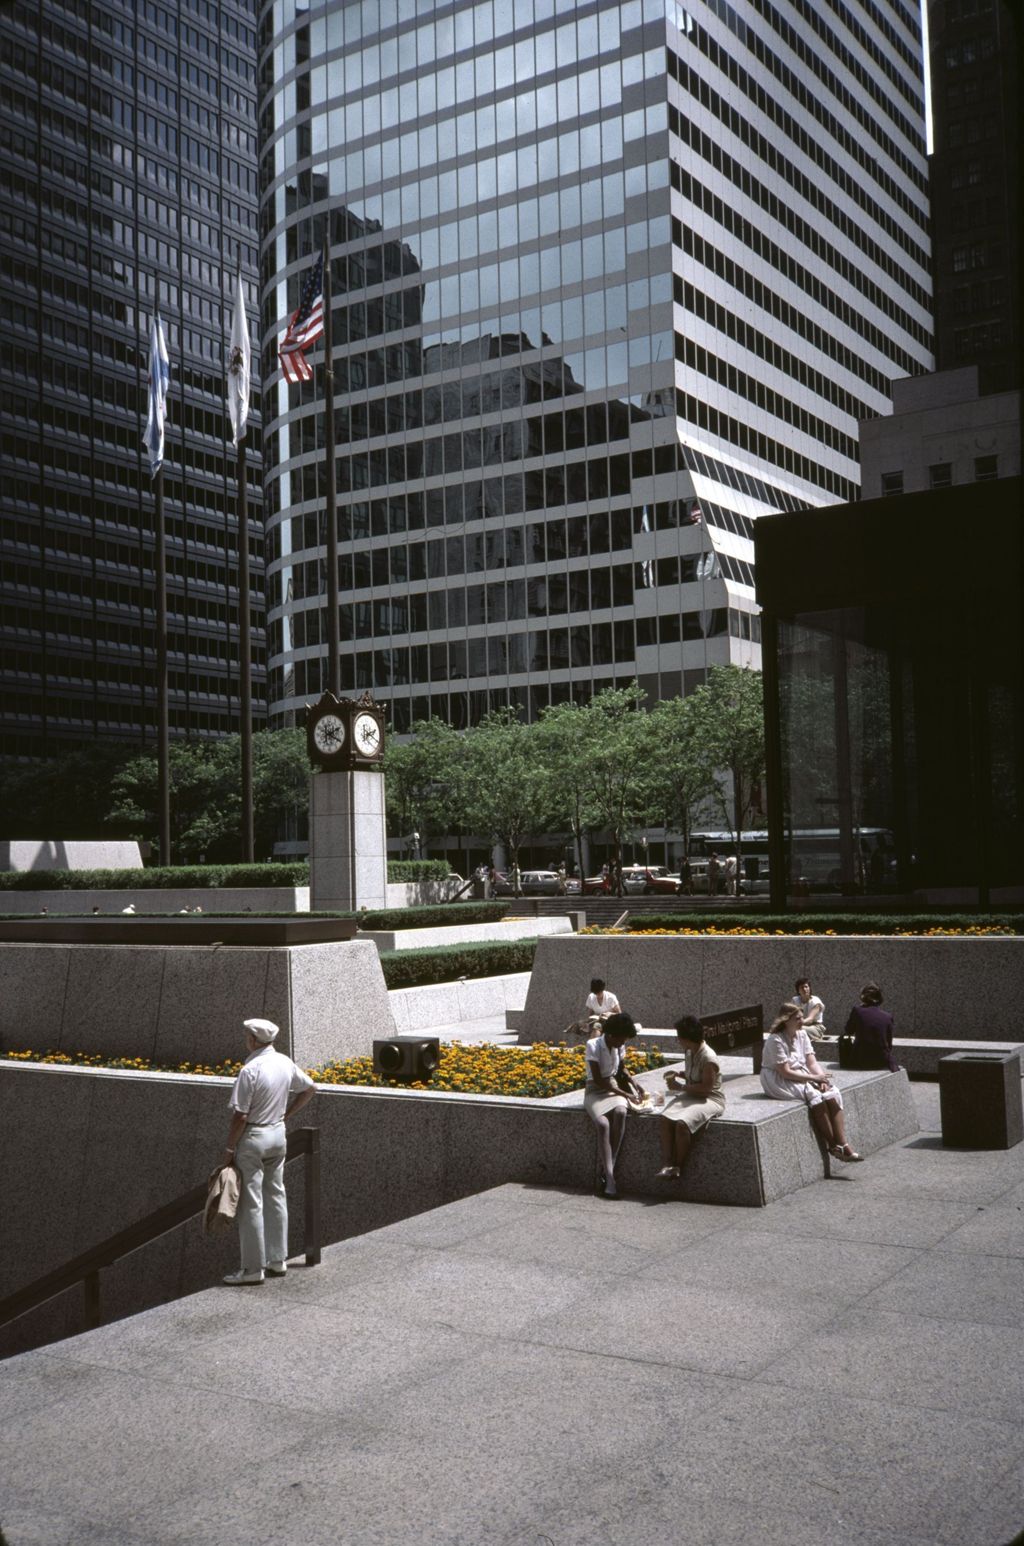 Miniature of Plaza, First National Bank of Chicago Building